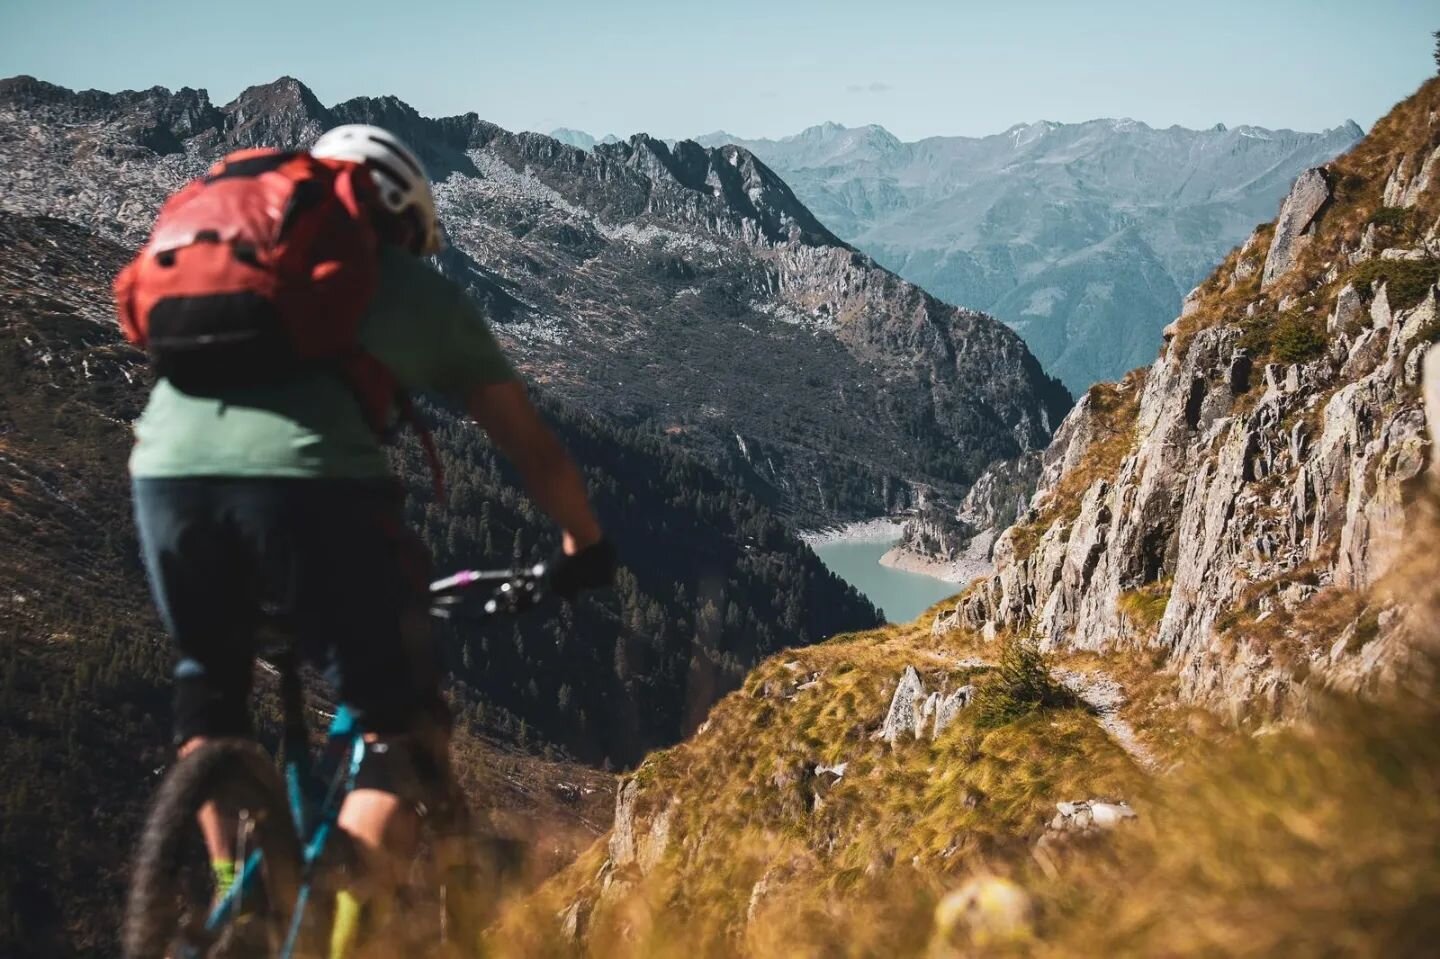 Lake Garda to Lake Como. A wild and challenging week of long days, tough climbs and janky descents. All rewarded with epic views, crazy trails, and a sense of true backcountry adventure (plus maybe a gelato or two!)

We have two of these trips runnin